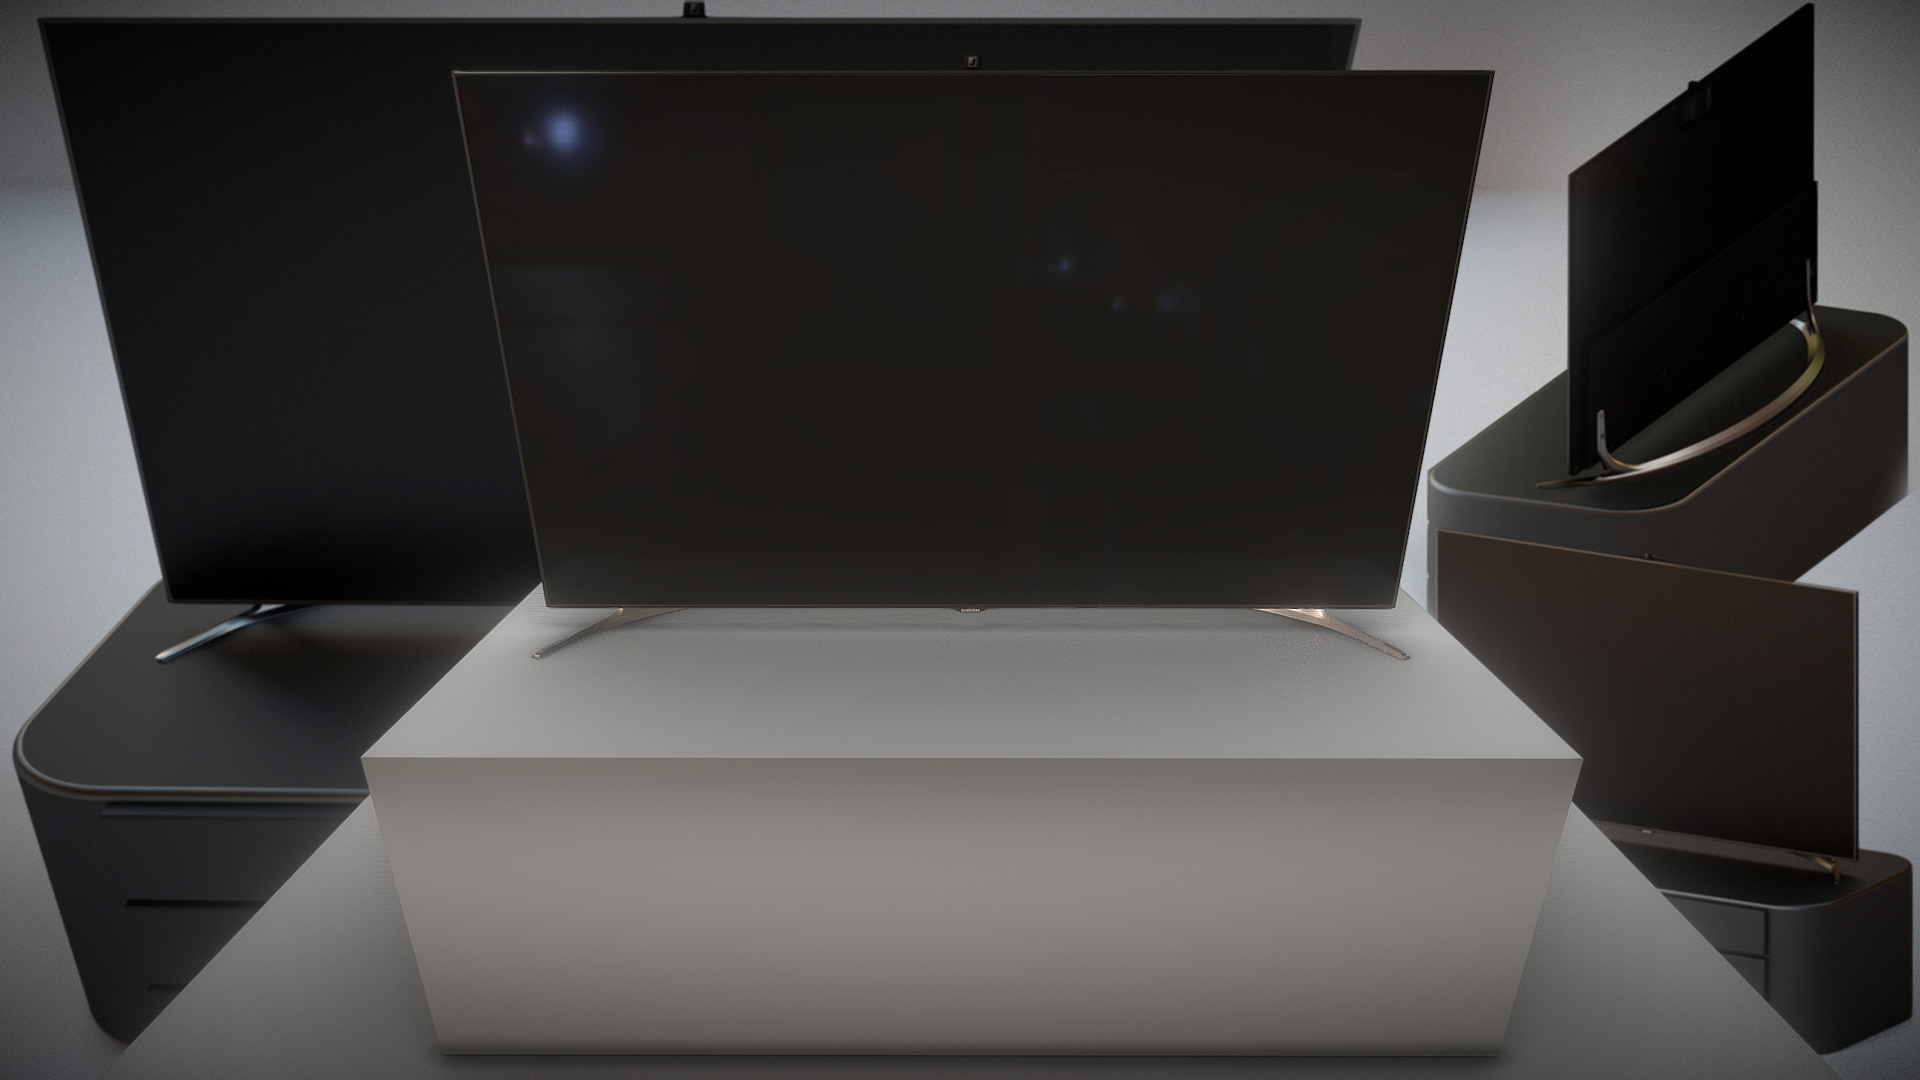 3D model Samsung Smart TV 55 Zoll - This is a 3D model of the Samsung Smart TV 55 Zoll. The 3D model is about a black television on a white table.